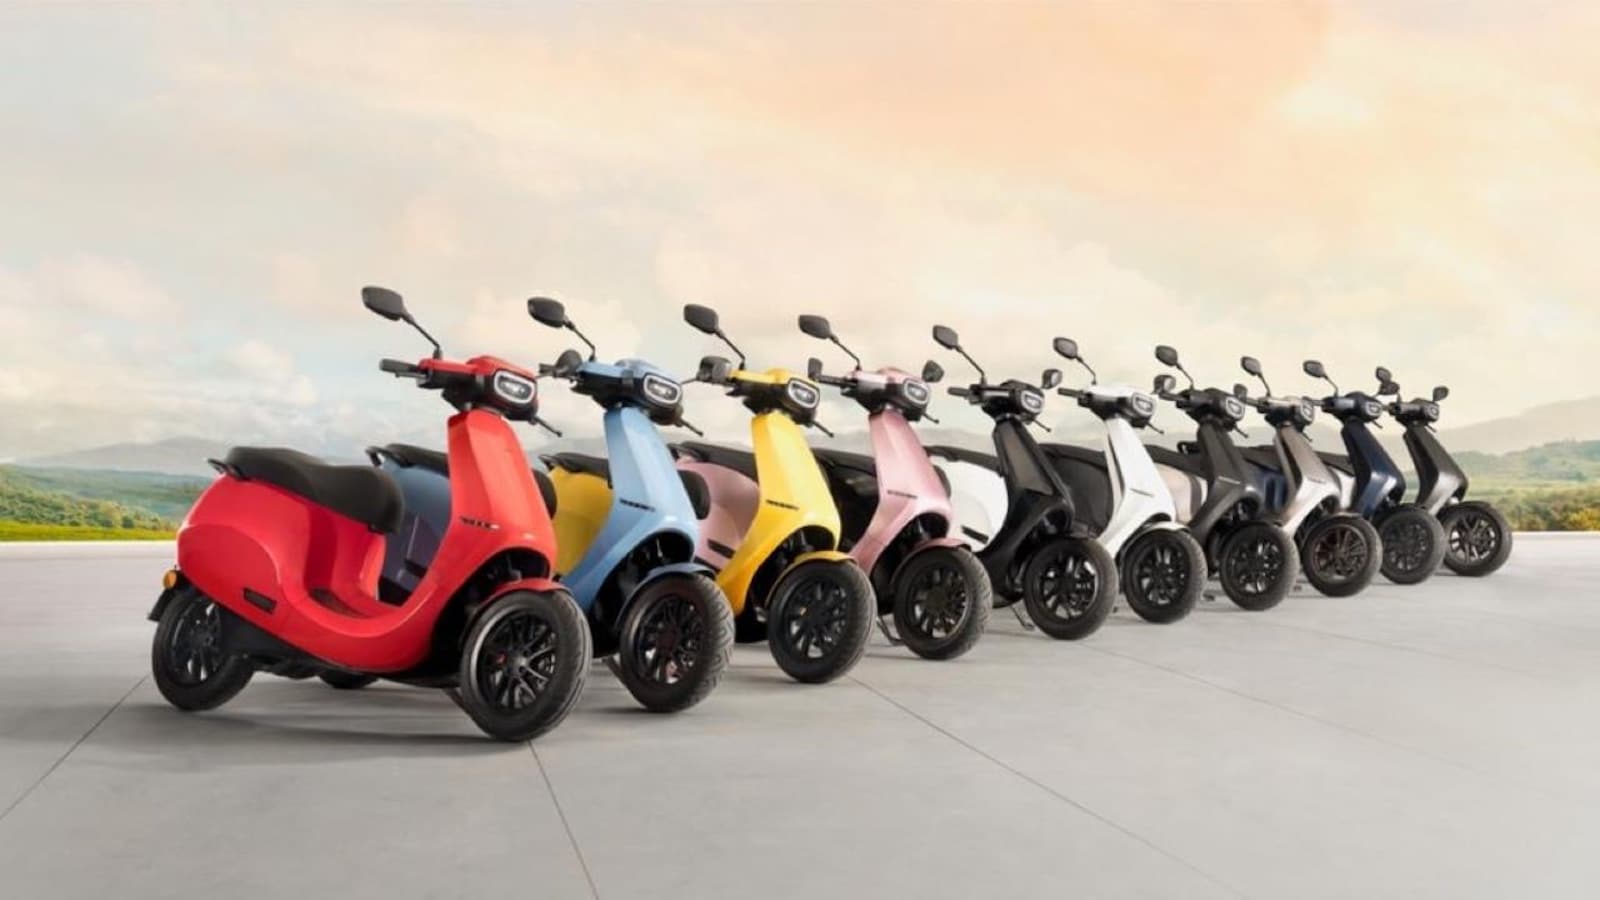 Electric Scooter Vs Petrol Scooter, A Guide For Which One To Choose Between The Two